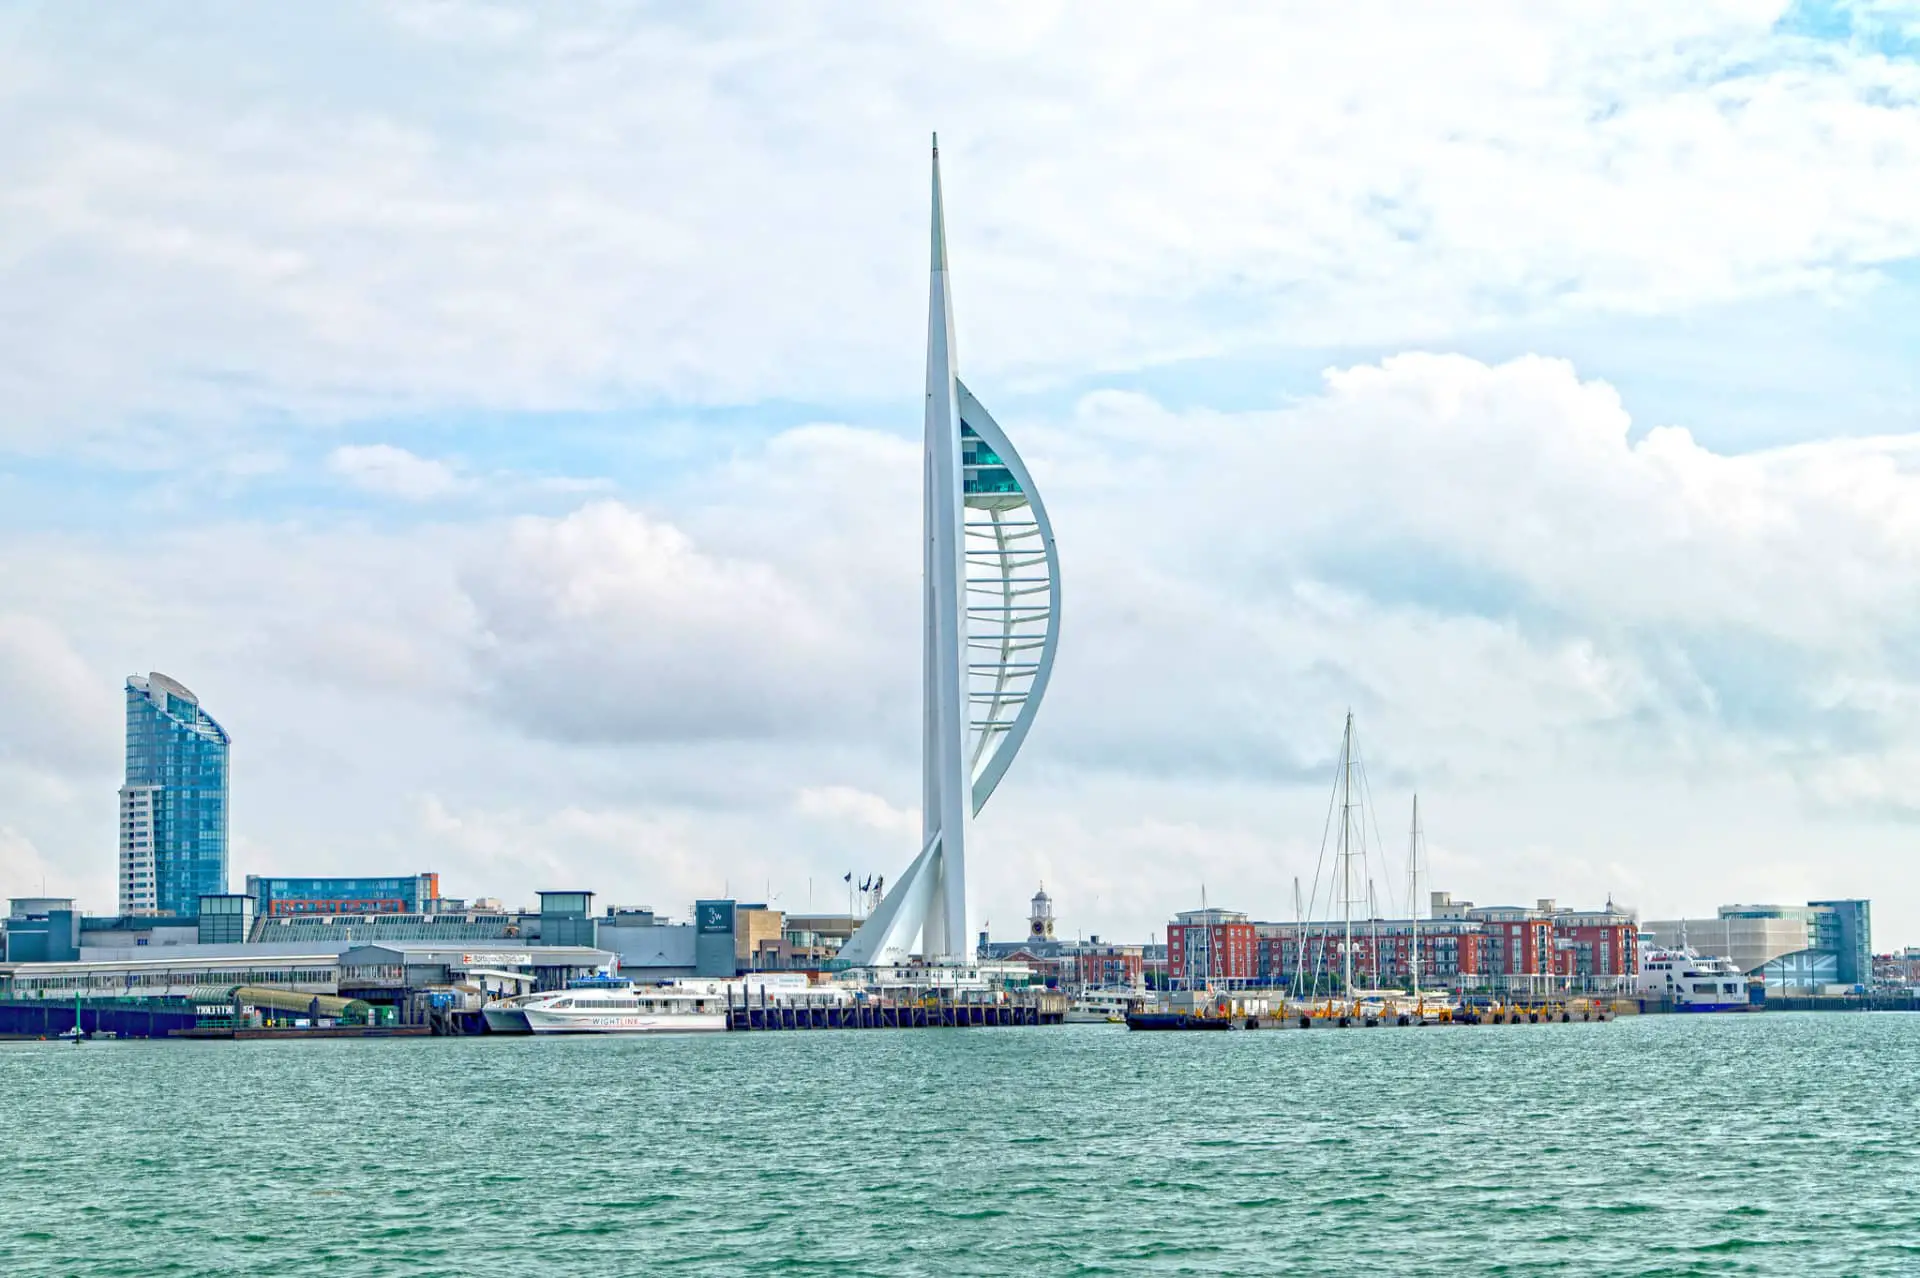 Spinnaker Tower from the water